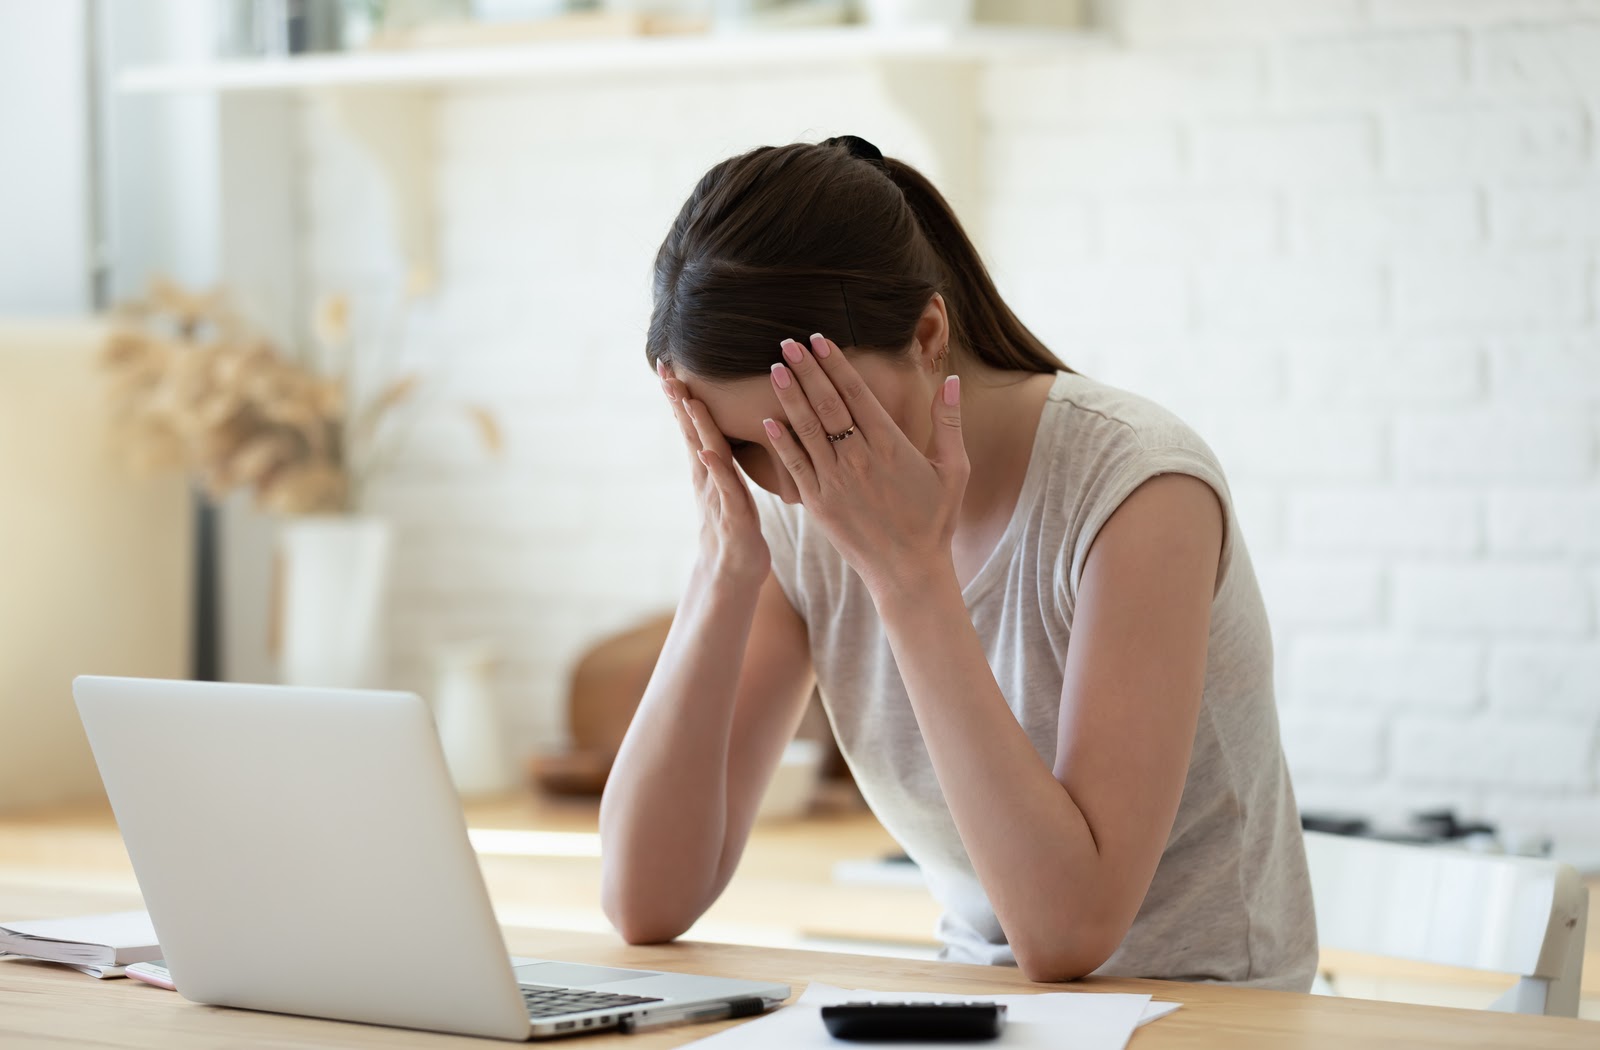 Upset woman sitting at laptop with head in hands after seeing a bad credit score